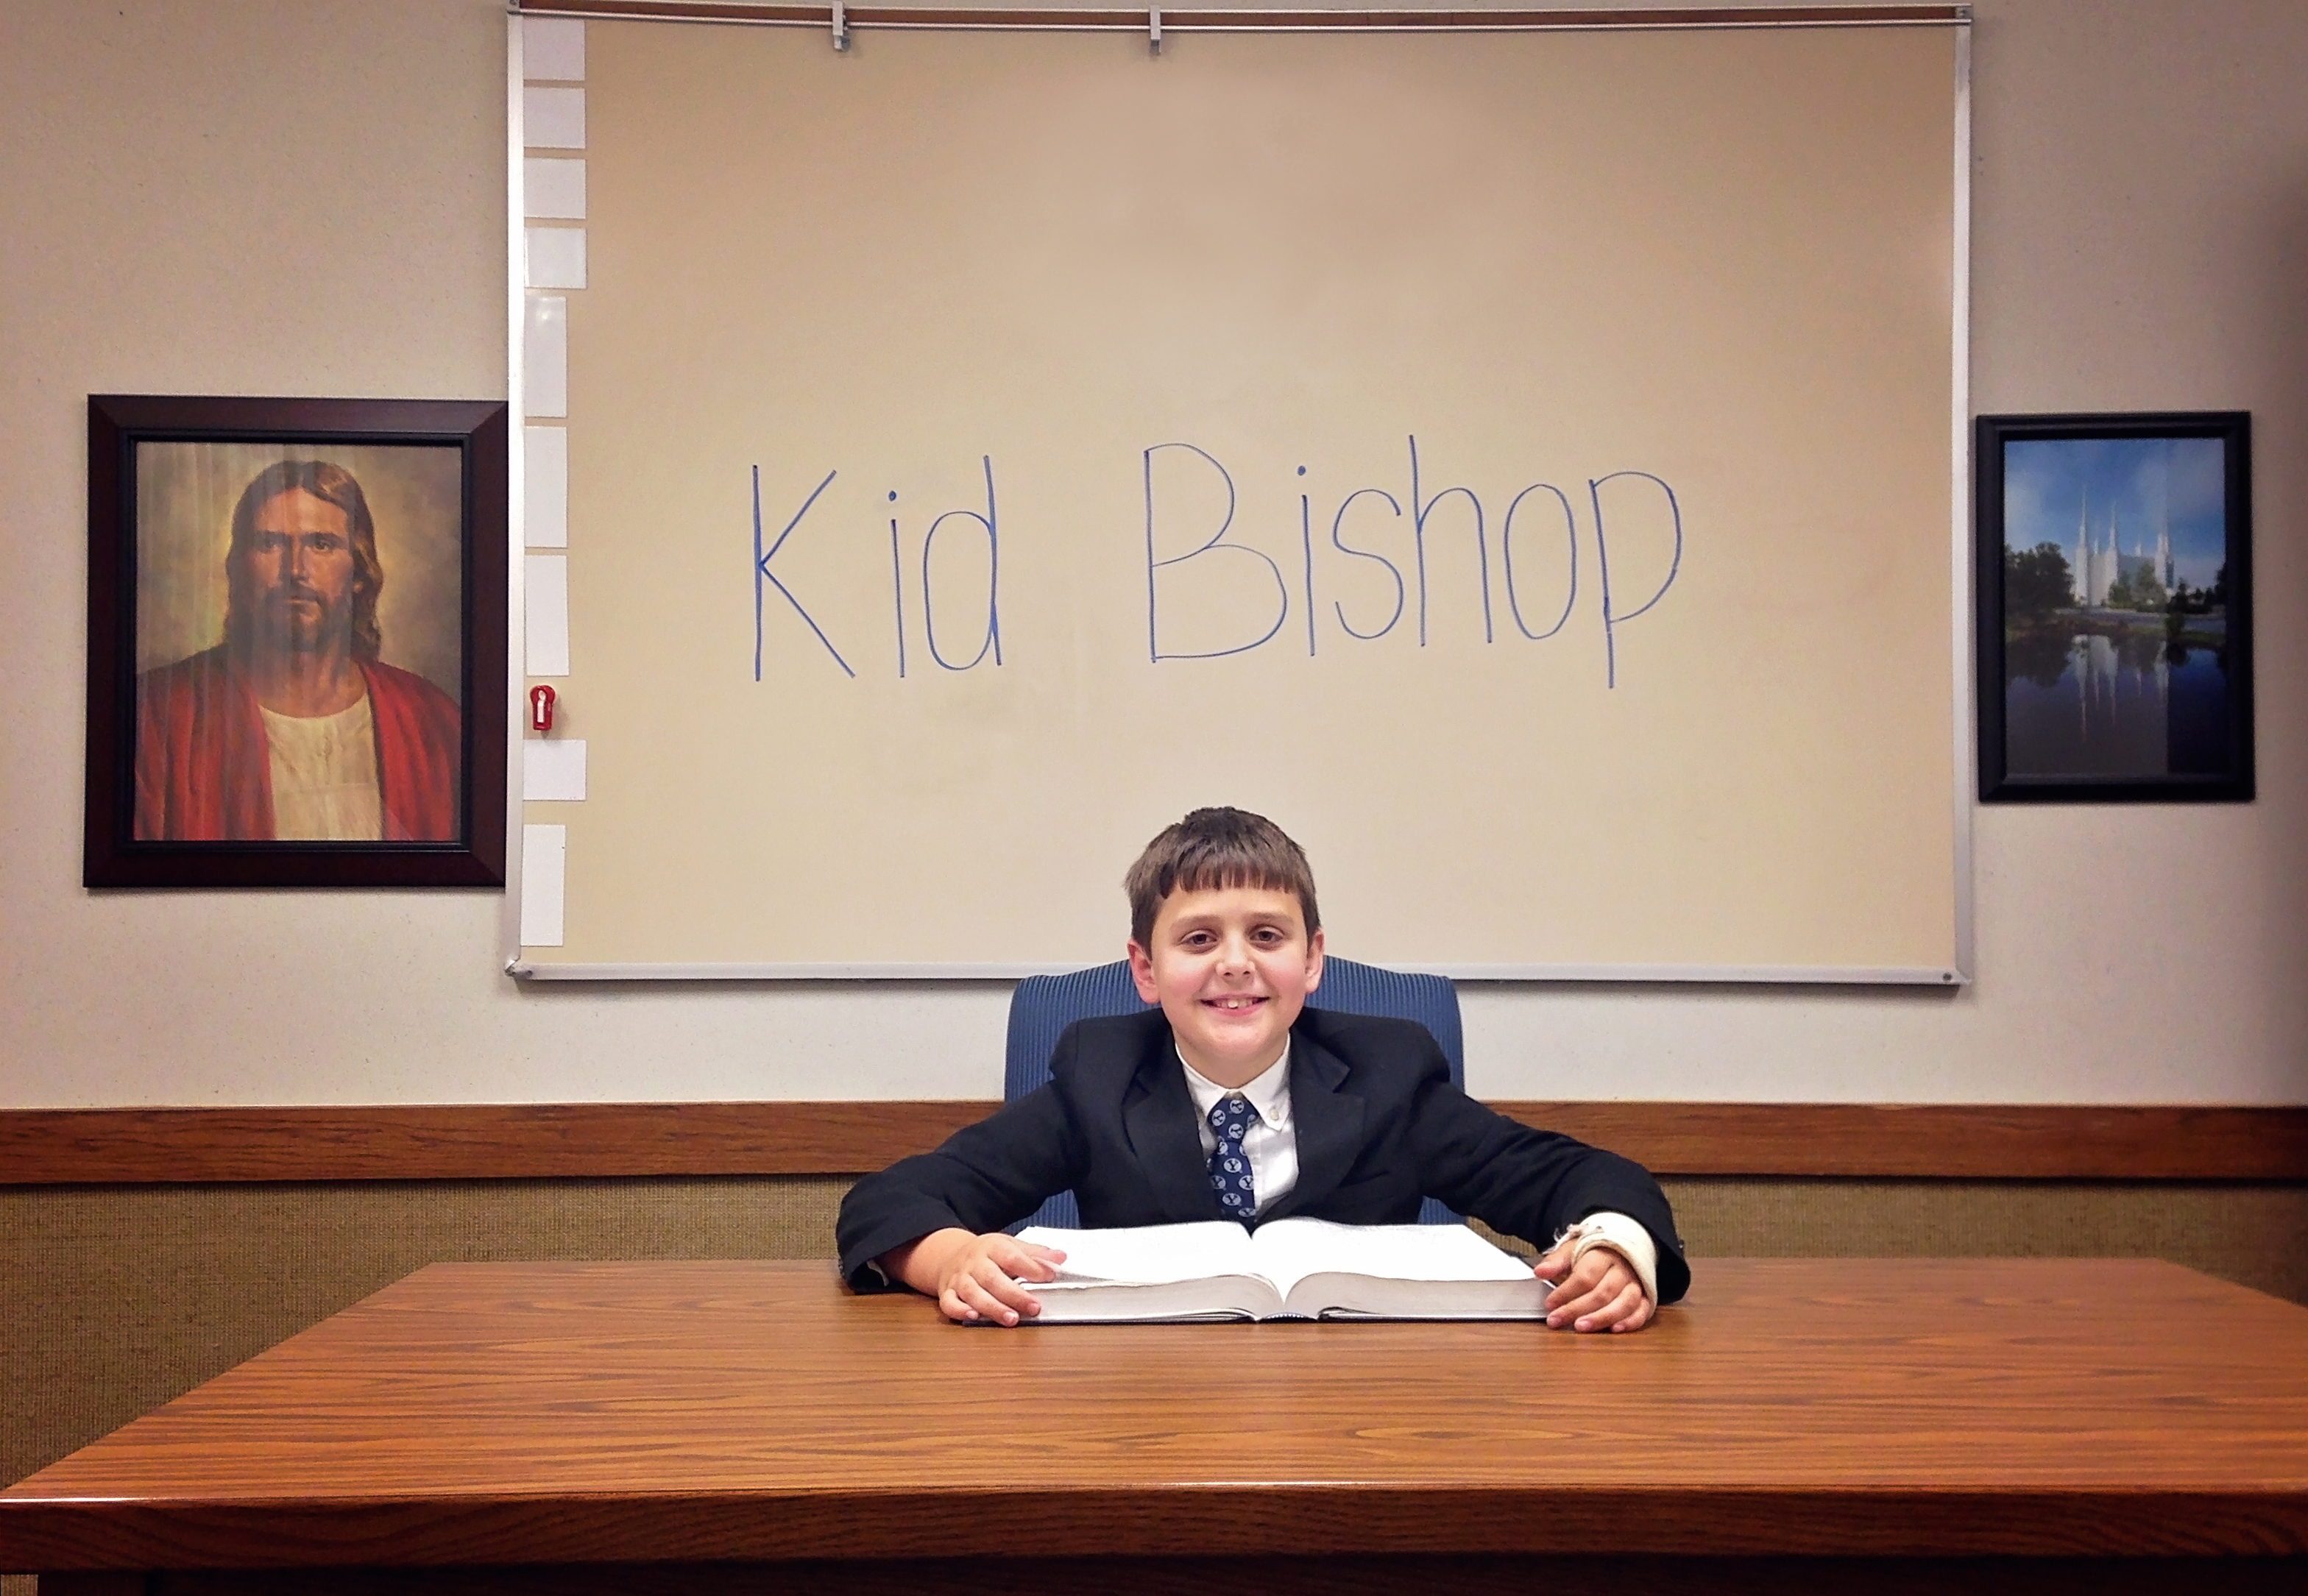 What an 8-year-old Bishop would change about church